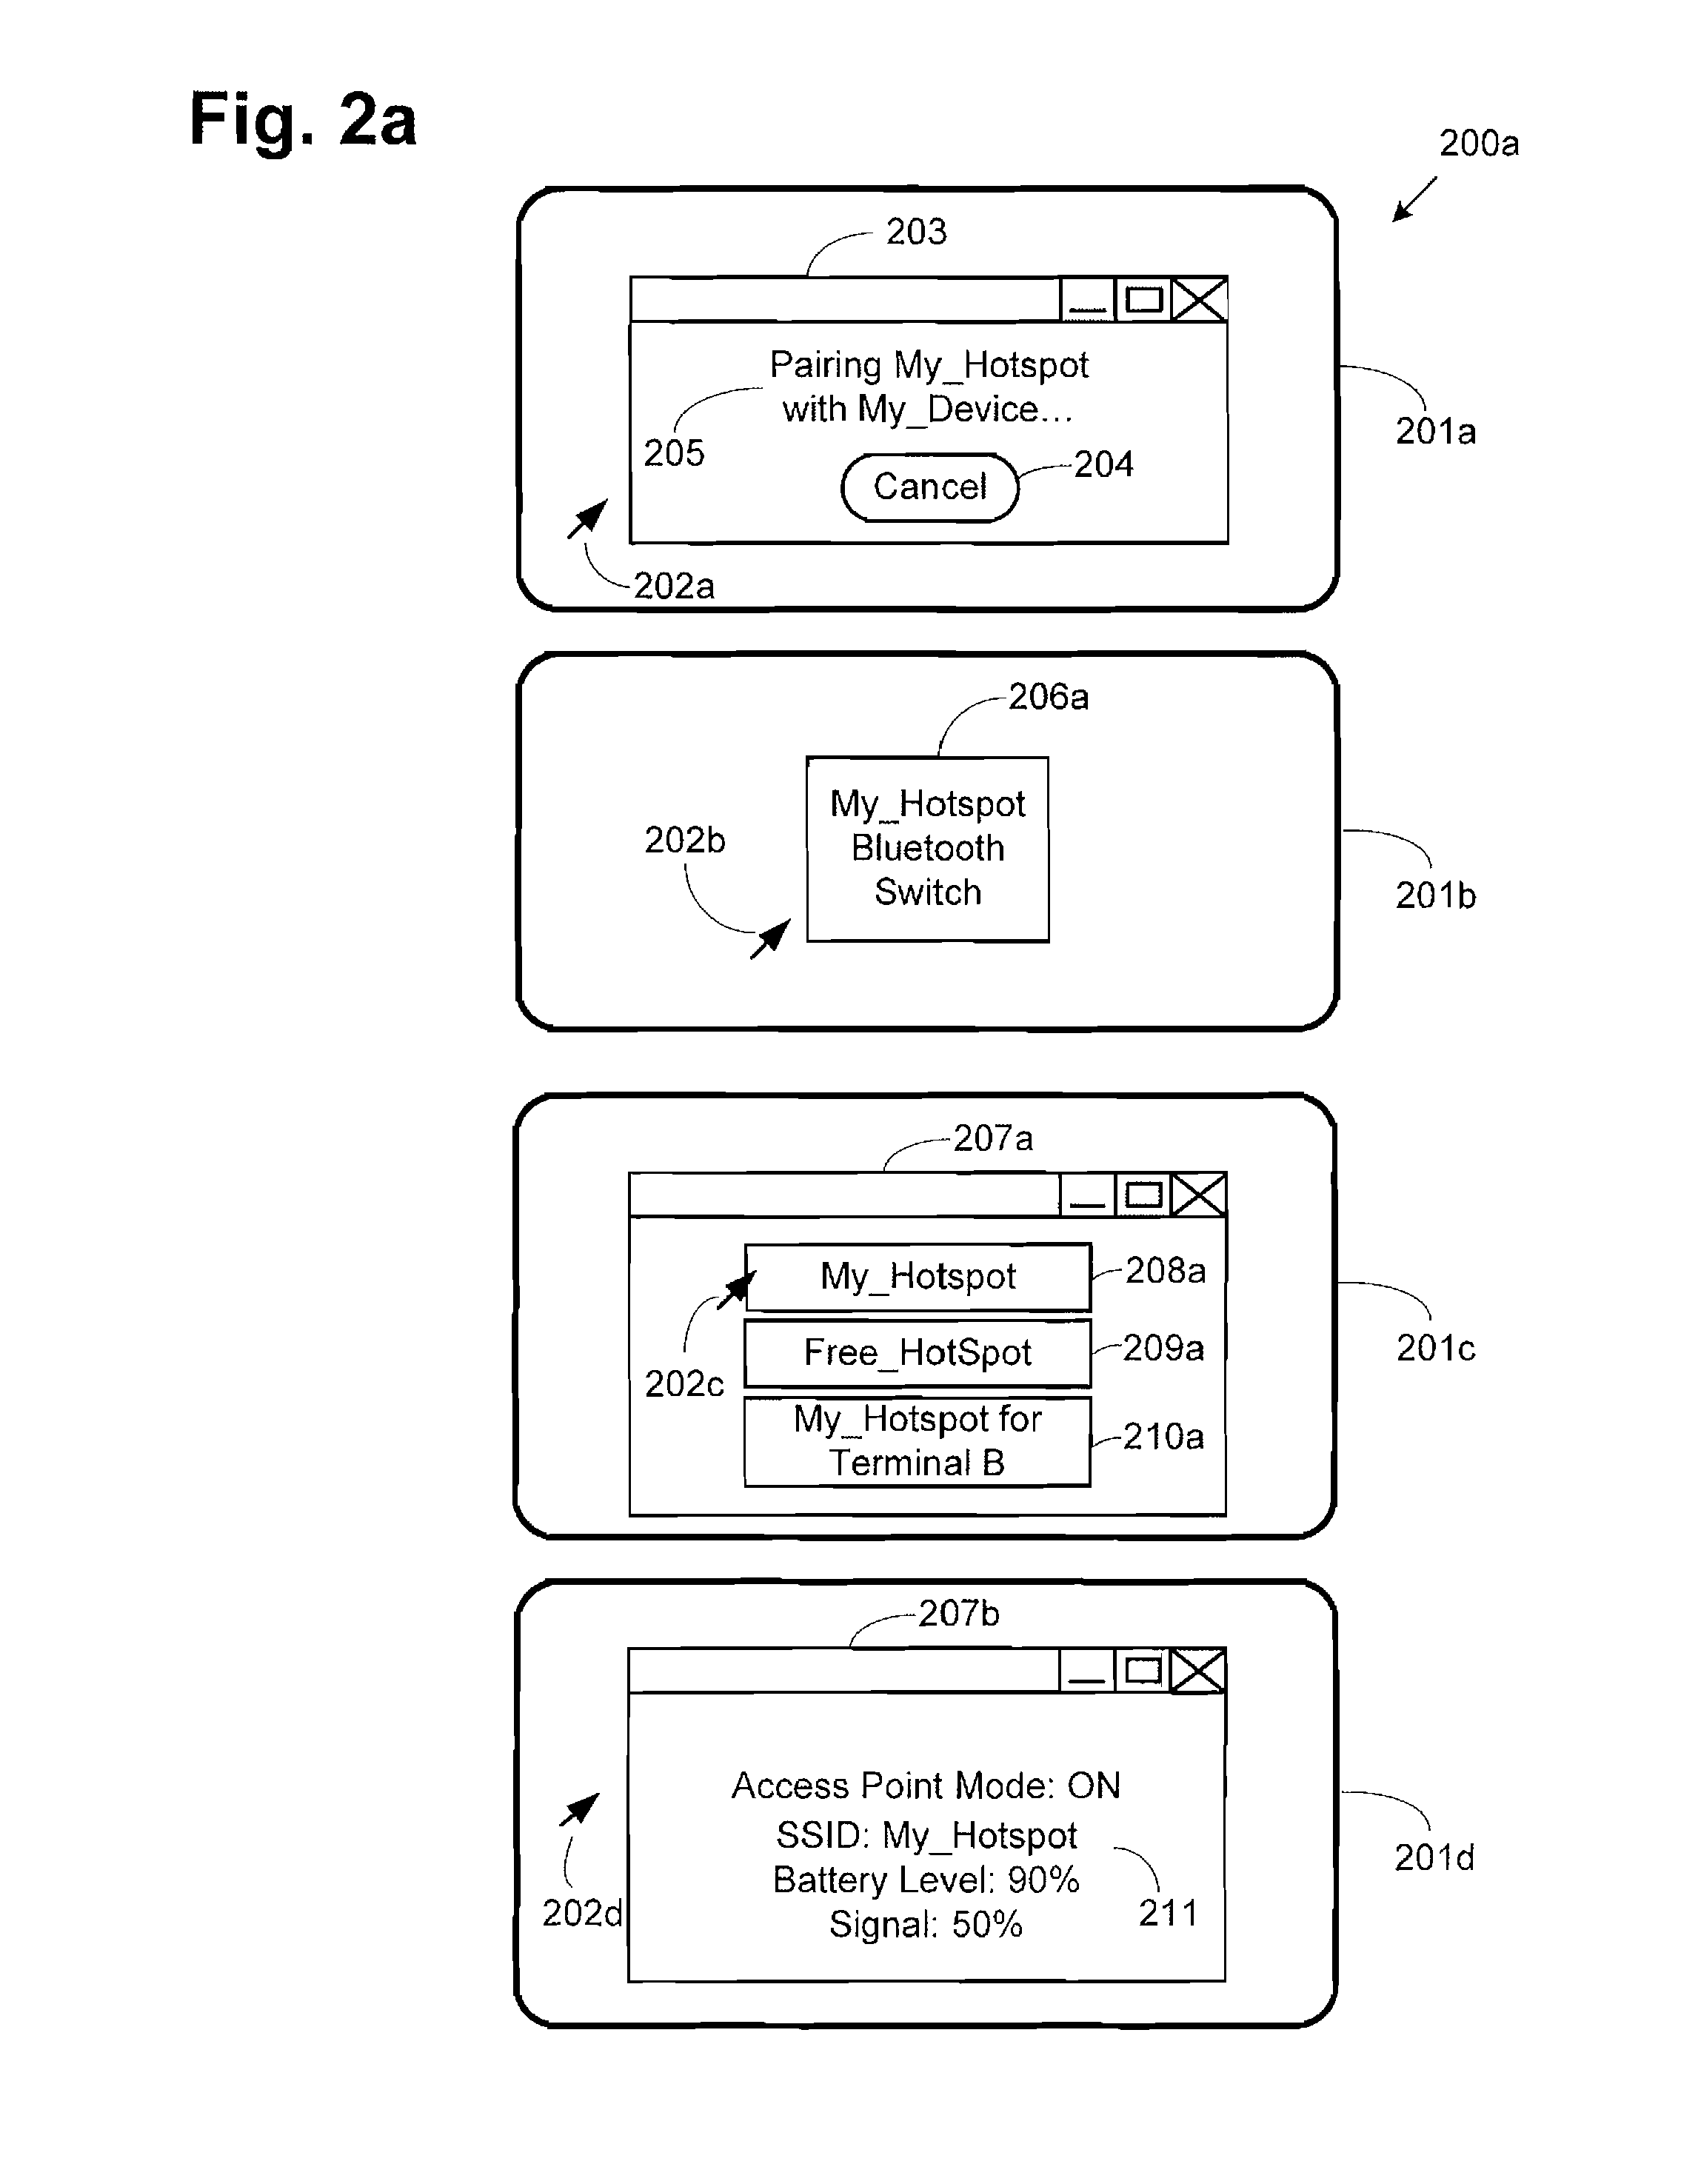 Enabling a Mobile Broadband Hotspot by an Auxiliary Radio